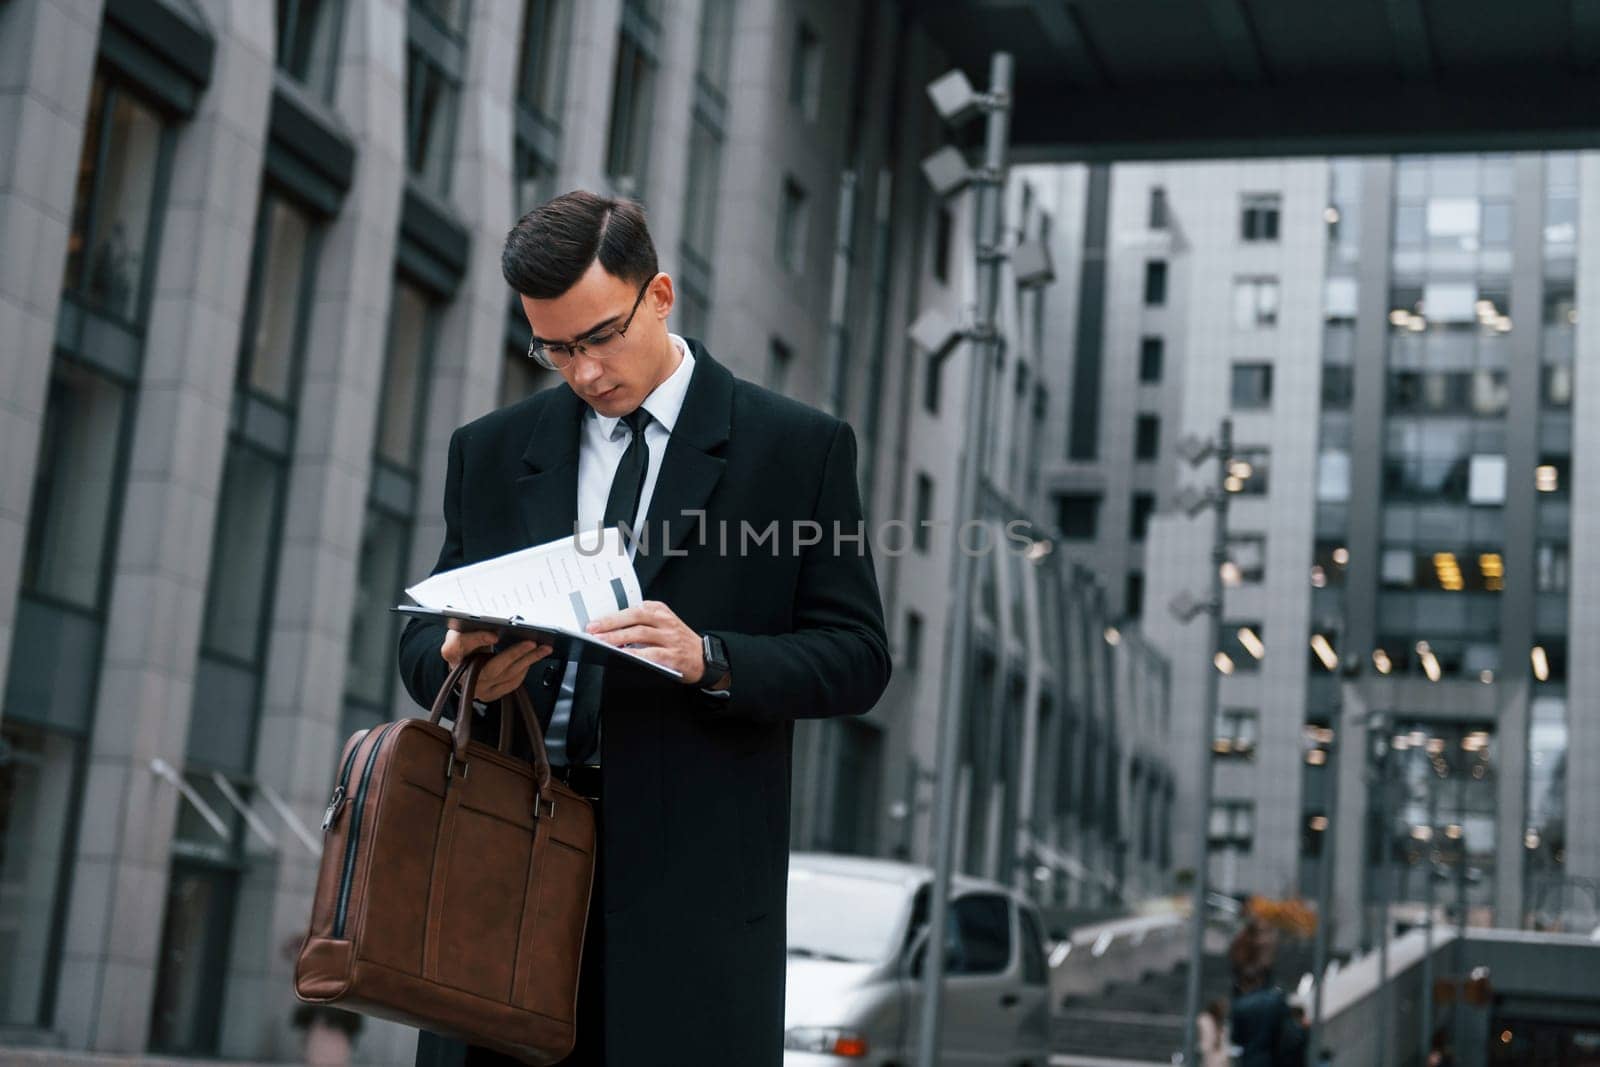 Holding documents. Businessman in black suit and tie is outdoors in the city.